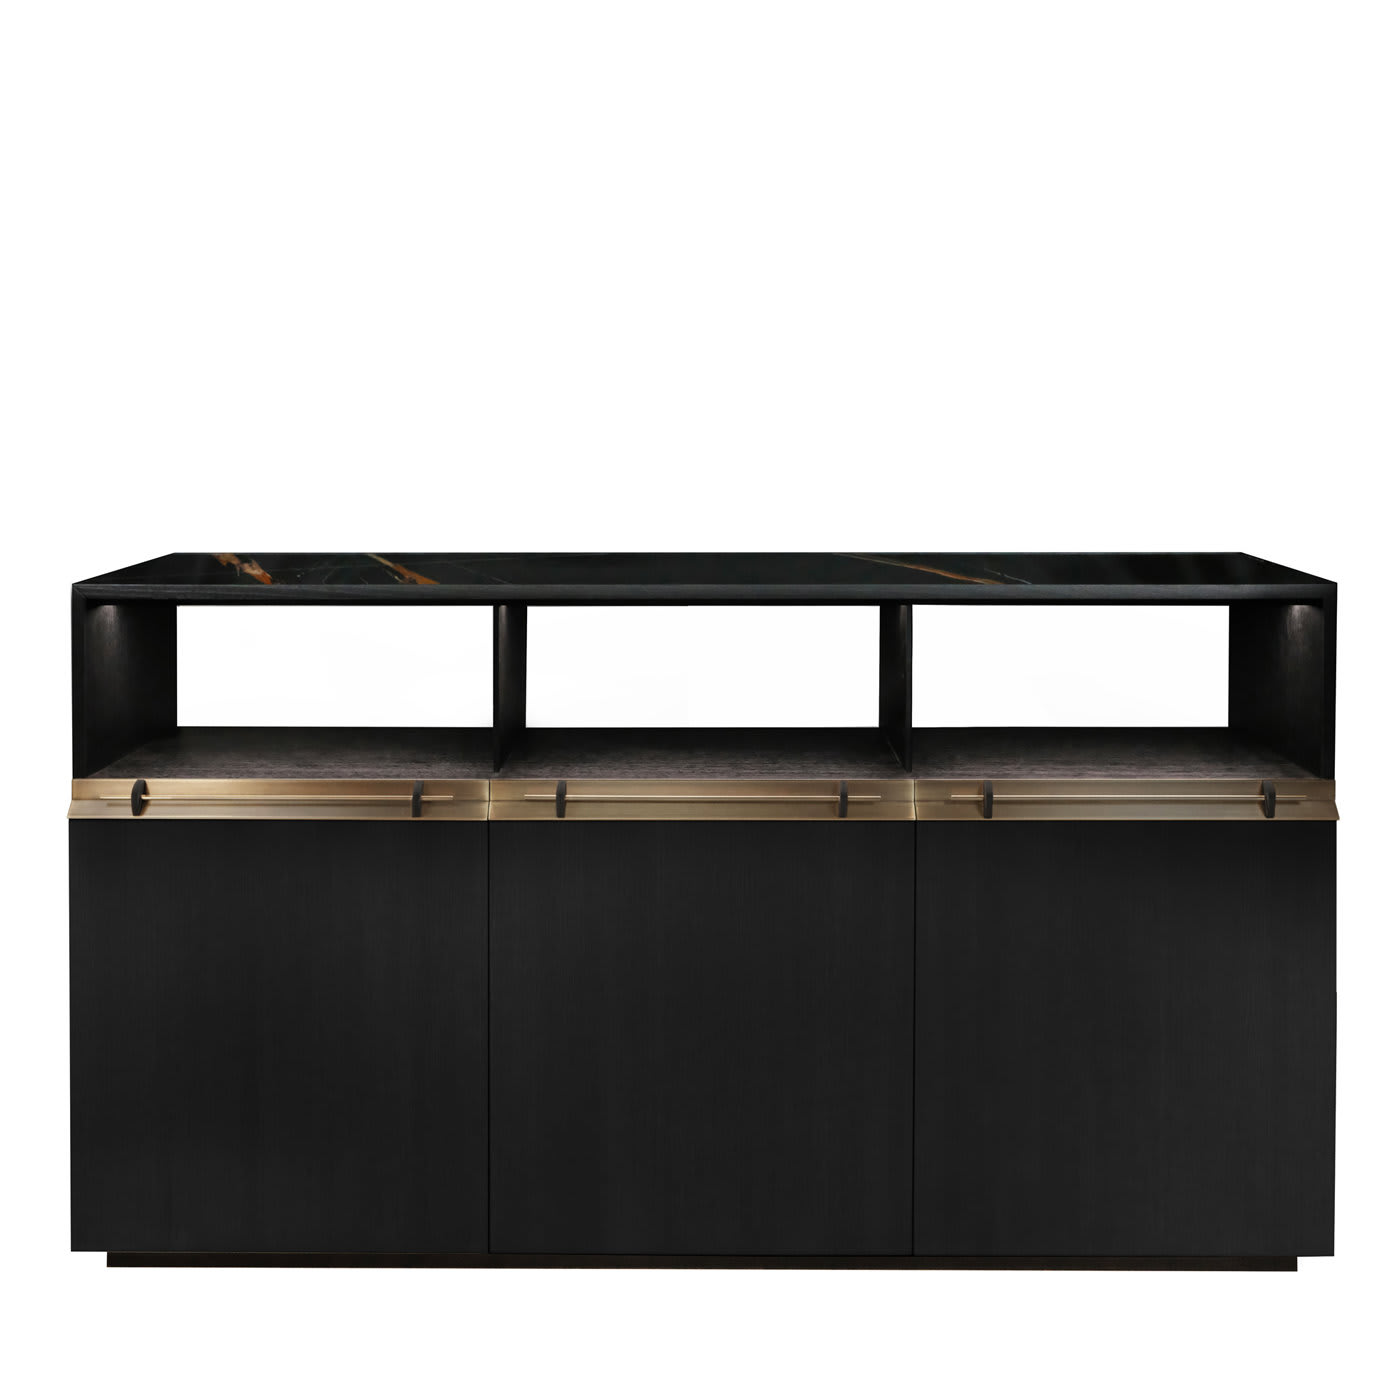 Asta Black Sideboard with Marble Top - Garbarino Collections